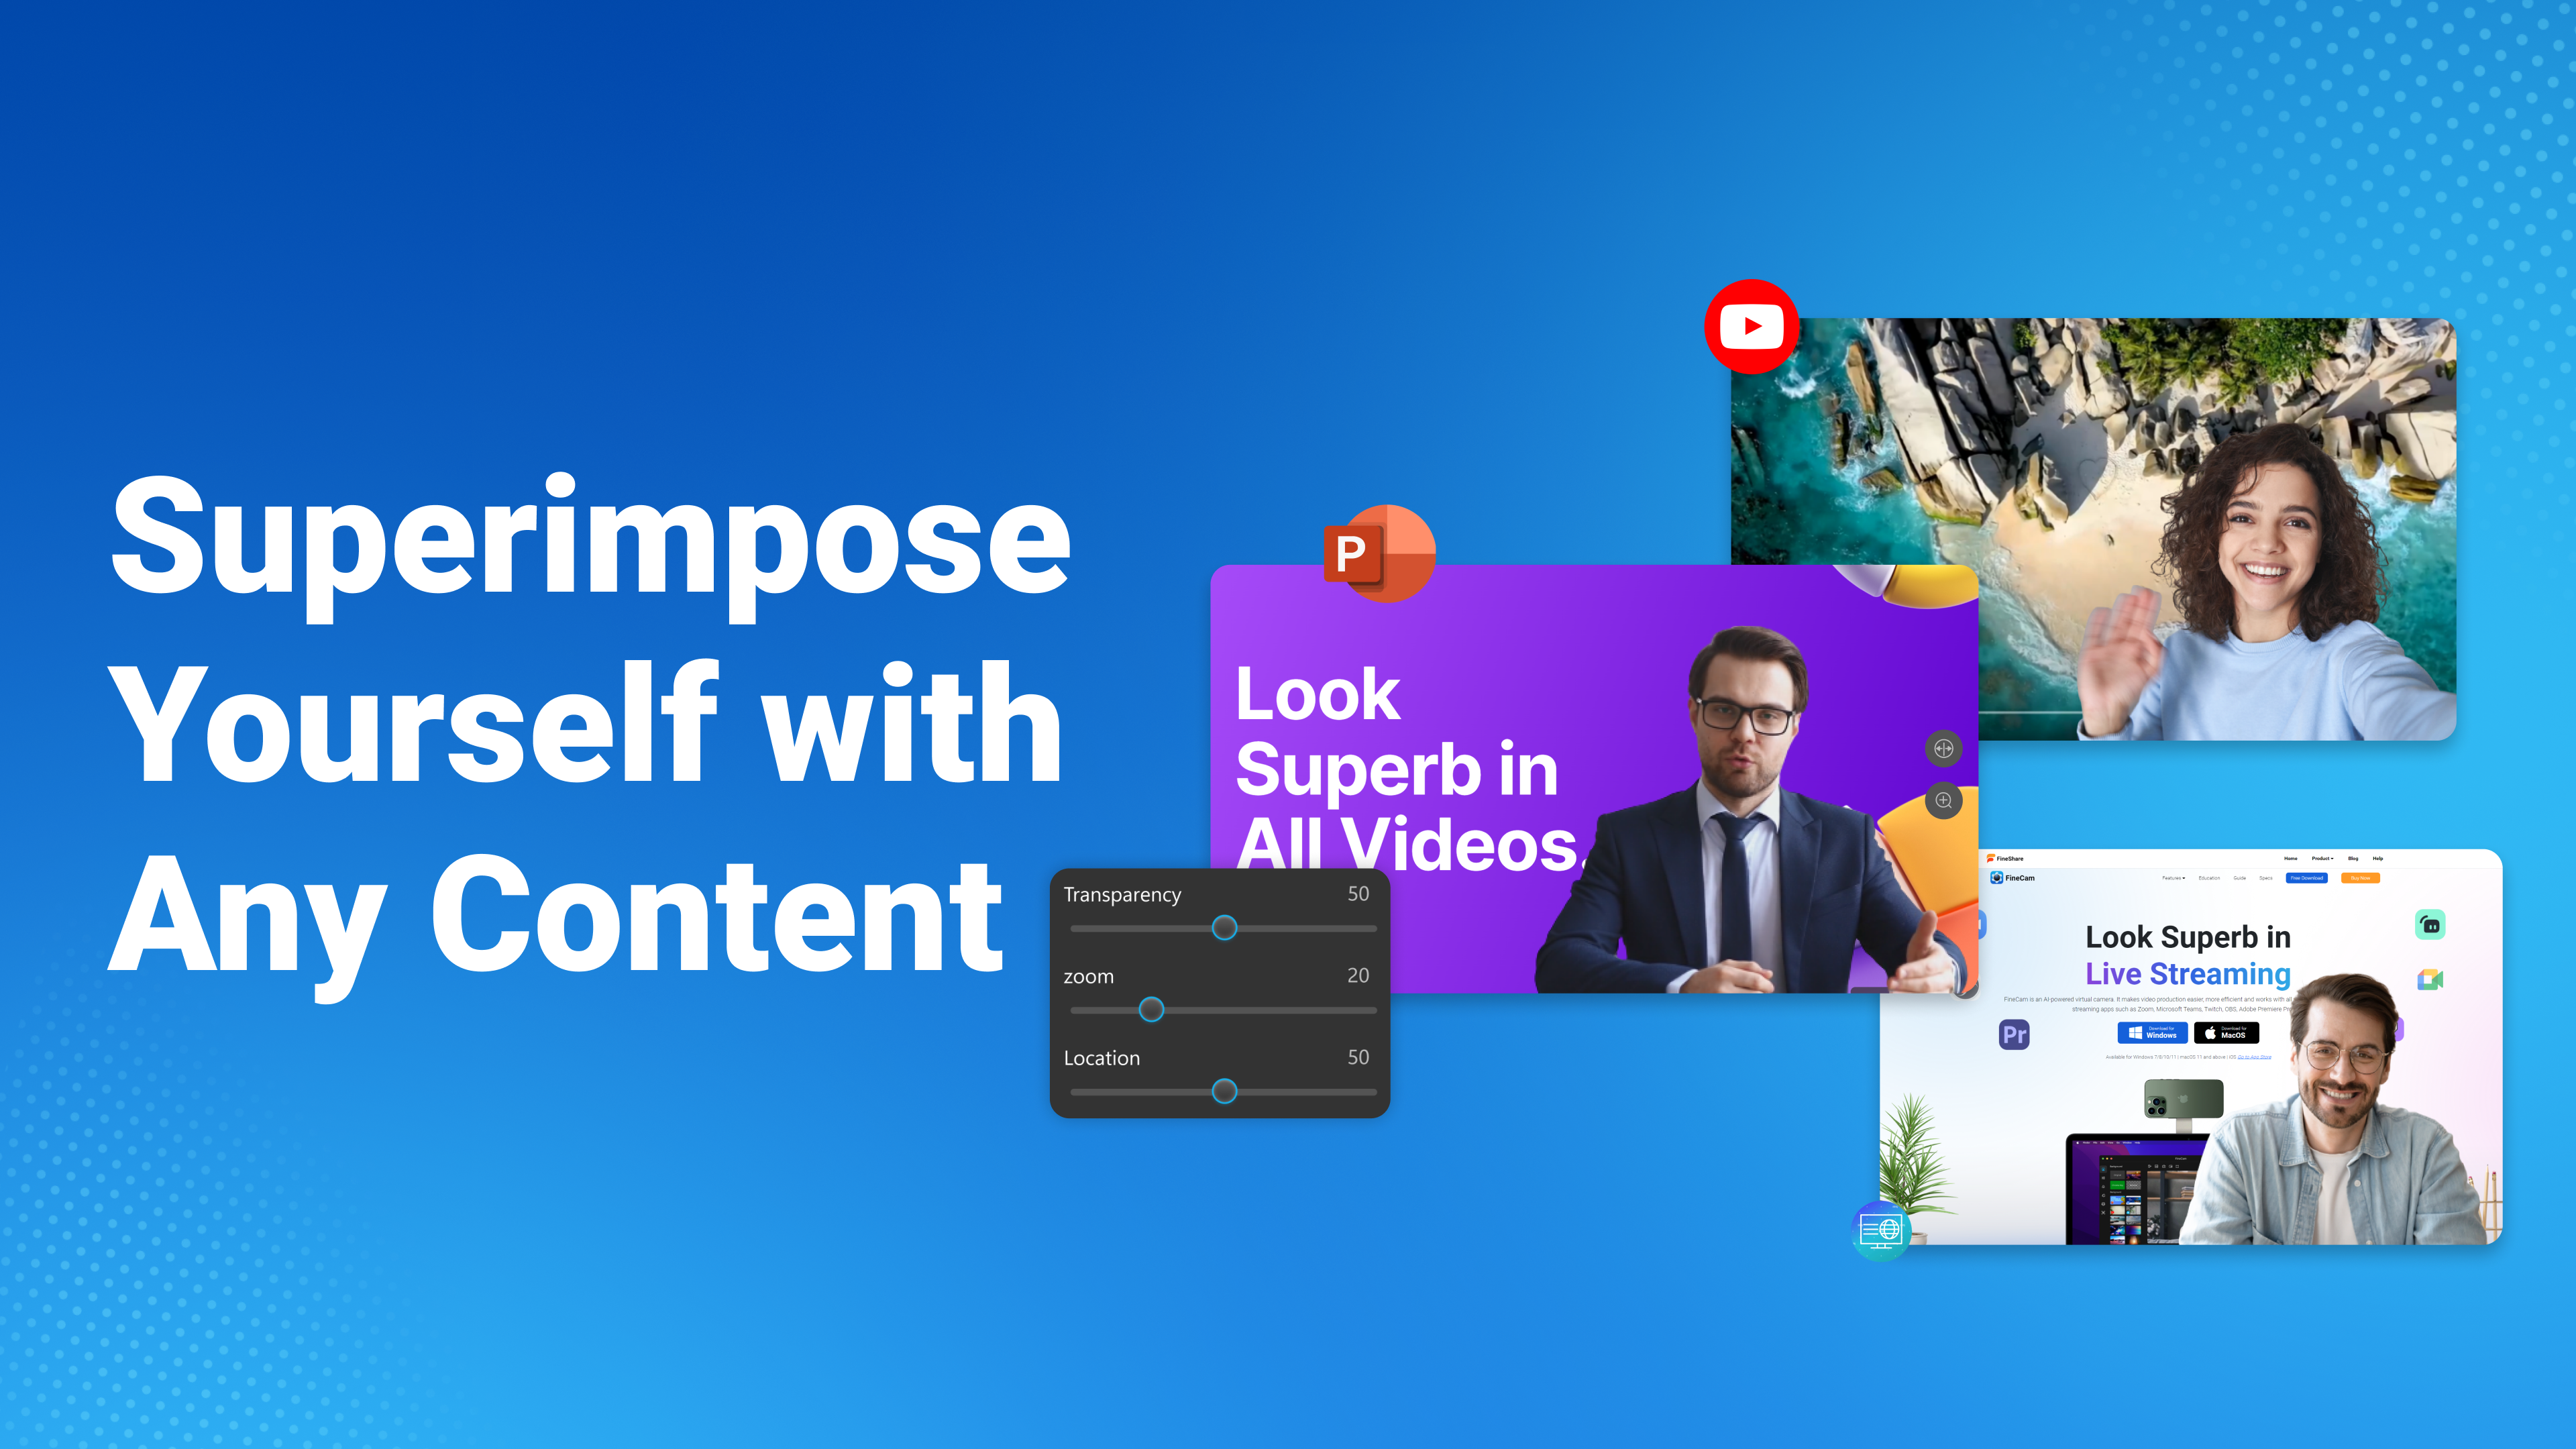 Superimpose Yourself with Any Content